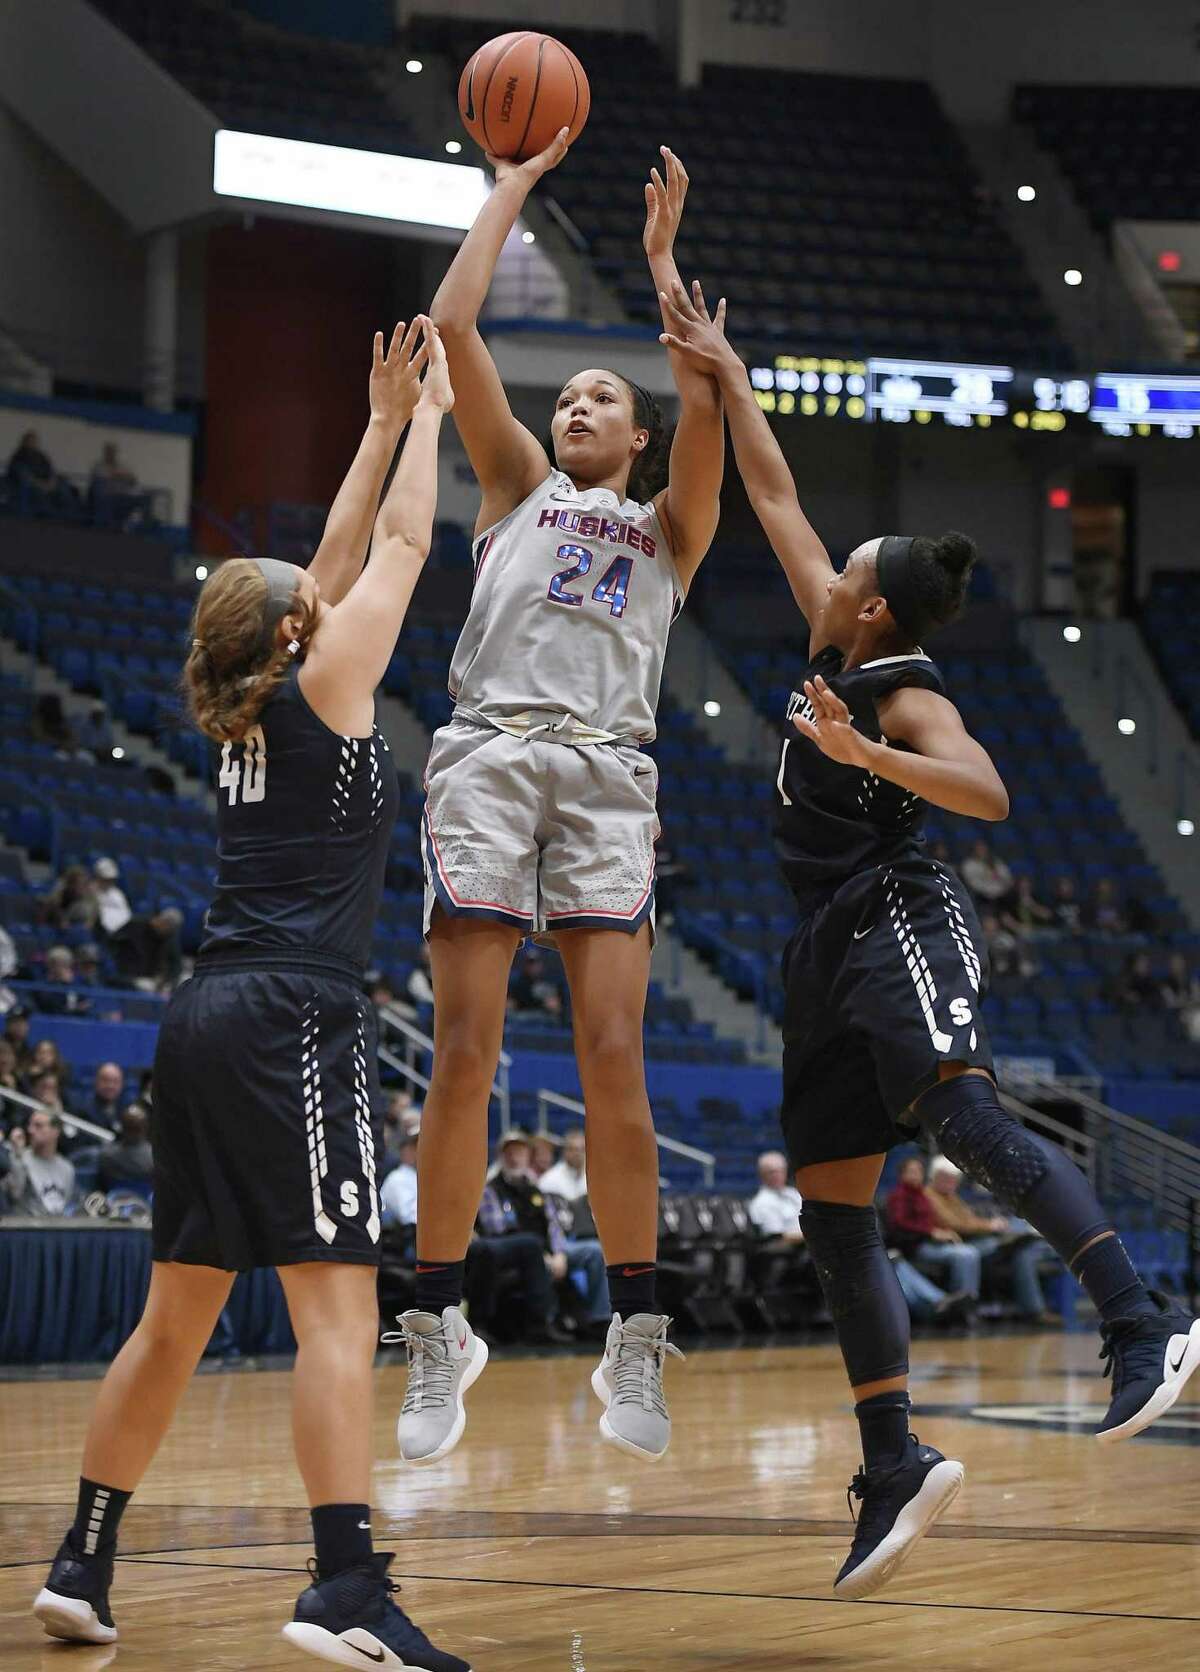 UConn’s Napheesa Collier, center, shoots as Southern Connecticut State’s Allie Smith, left and Imani Wheeler, right, defend on Thursday night in Hartford.